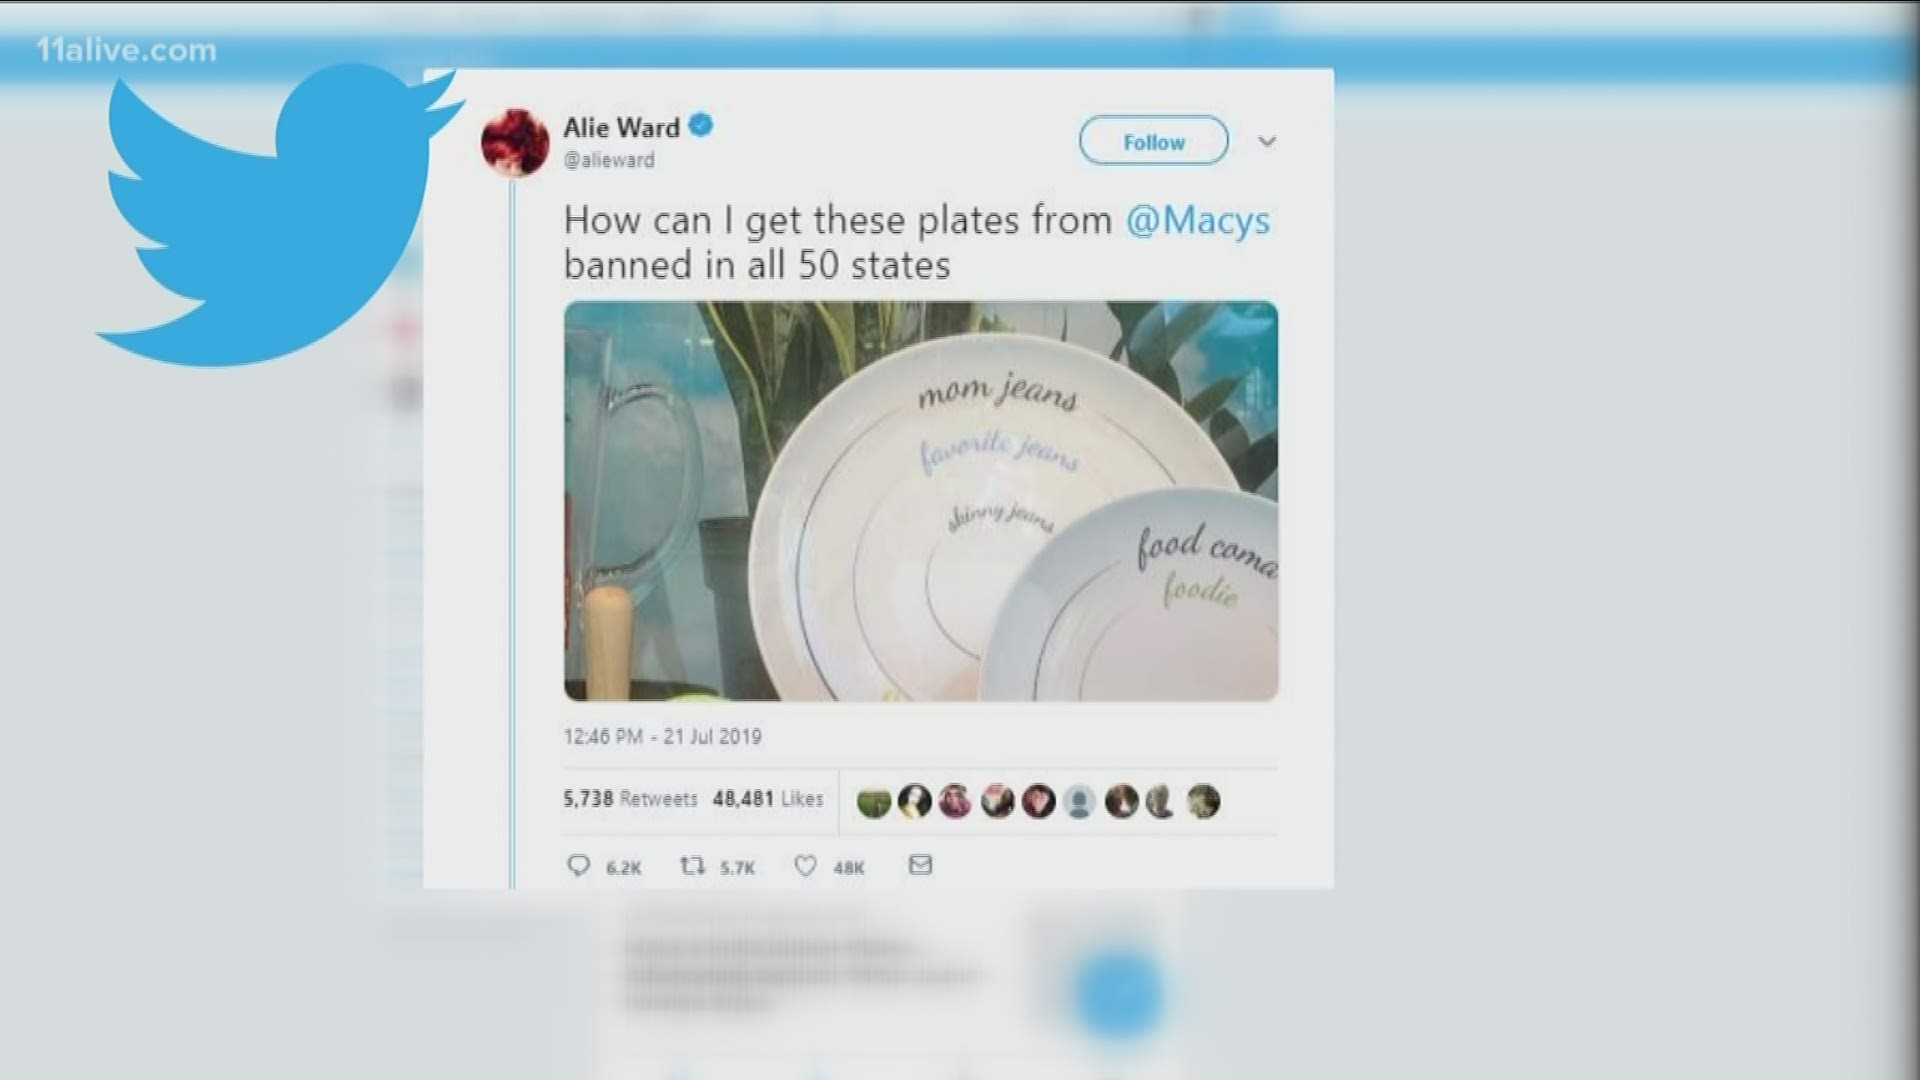 The dinner plates feature a diagram measuring portion sizes as either 'mom jeans,' 'favorite jeans,' or 'skinny jeans.'